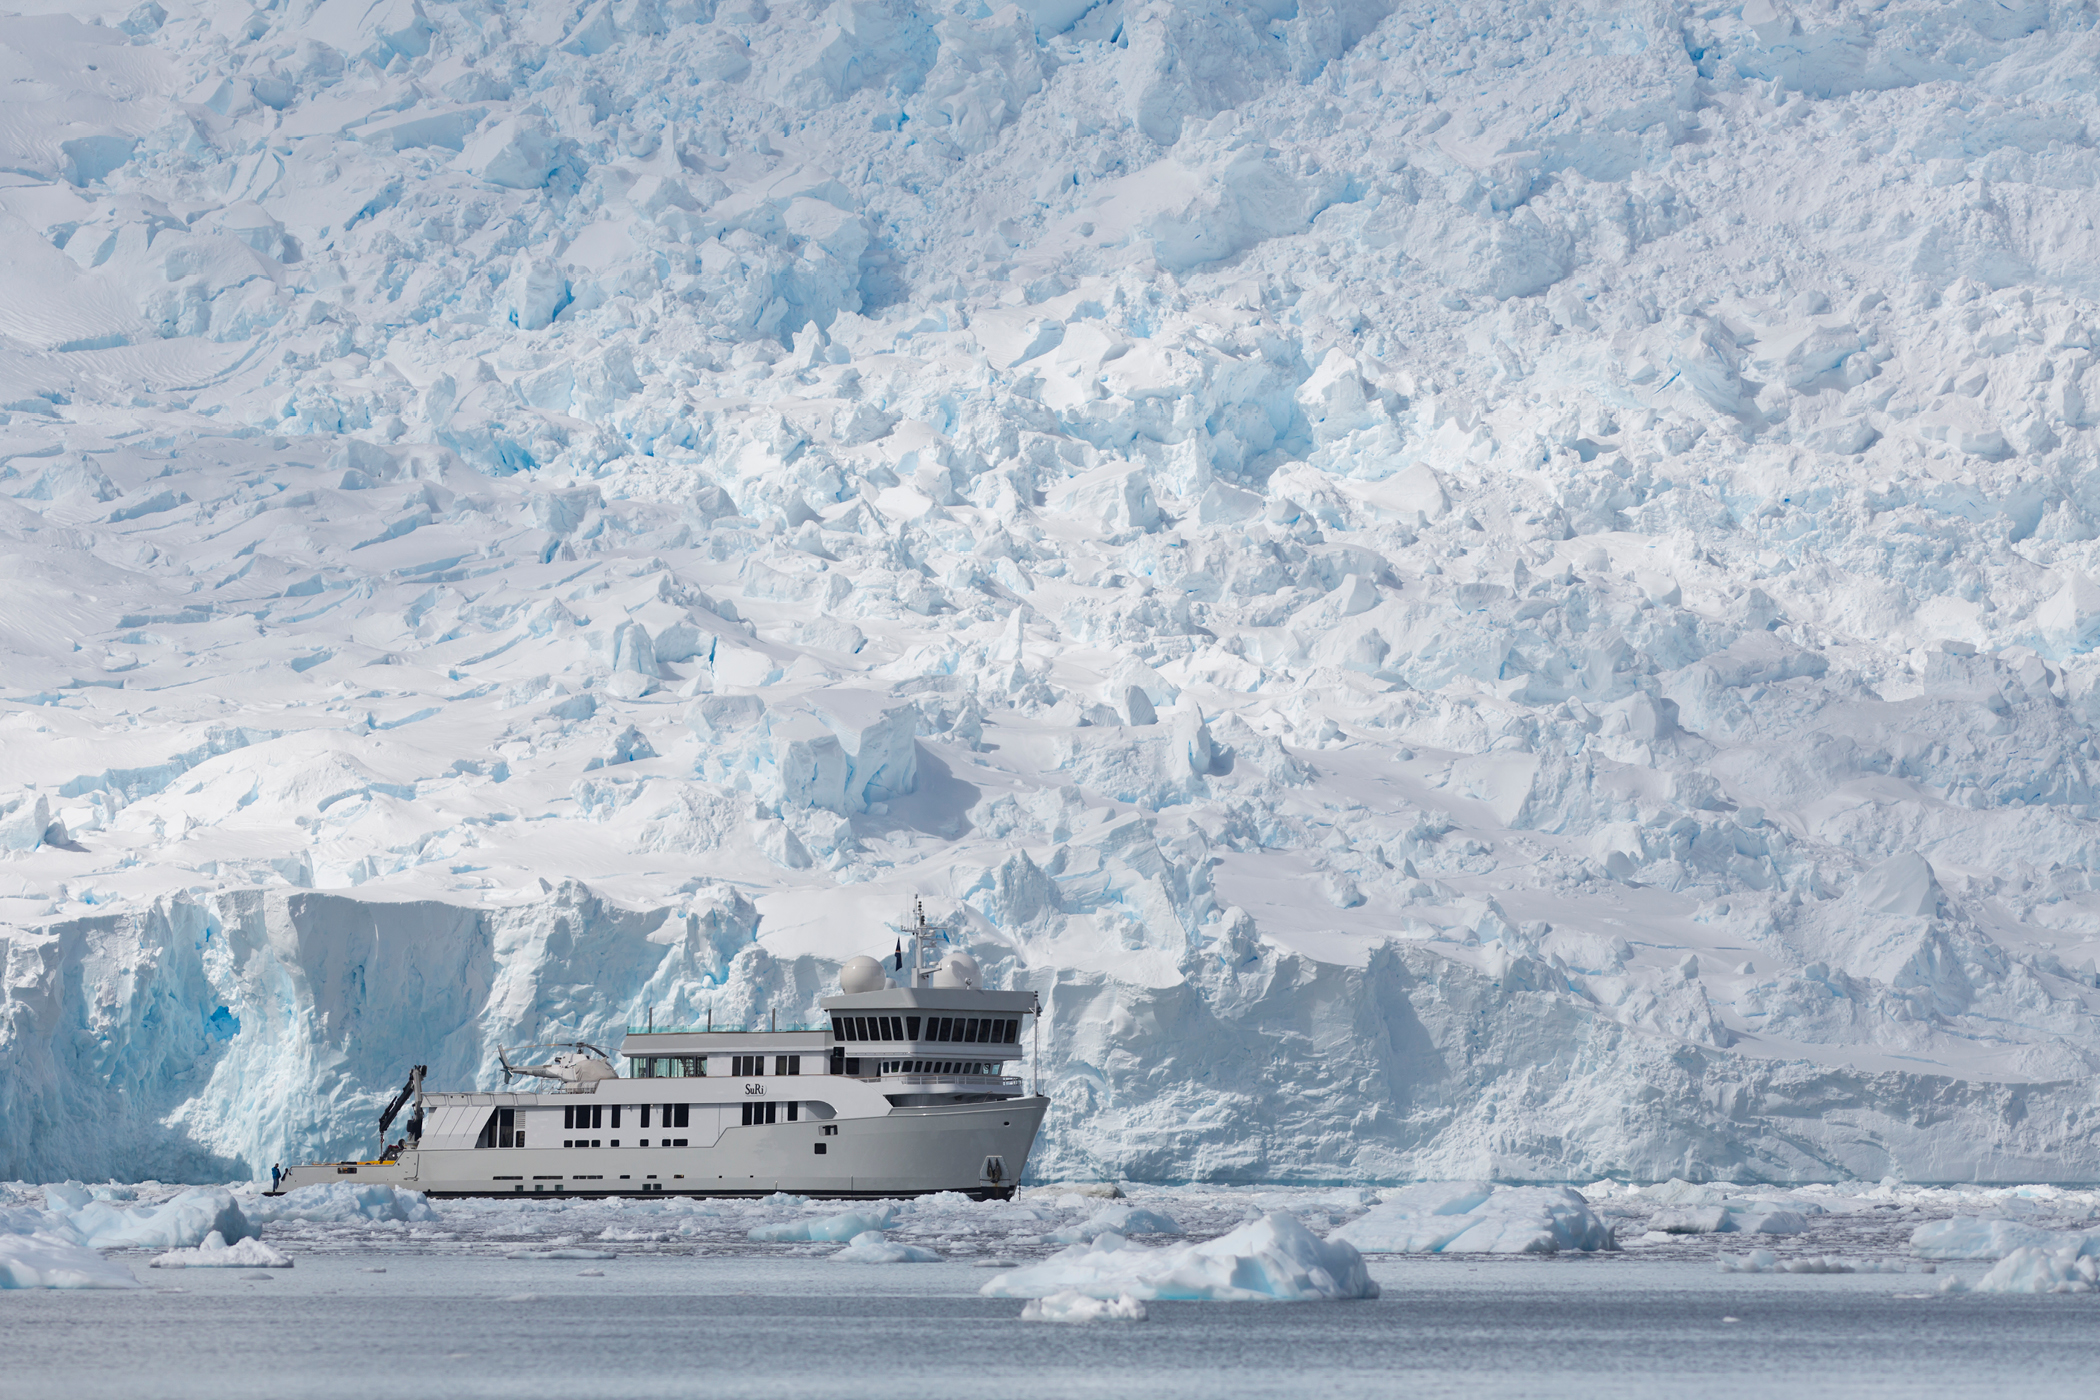 antarctic expedition yacht